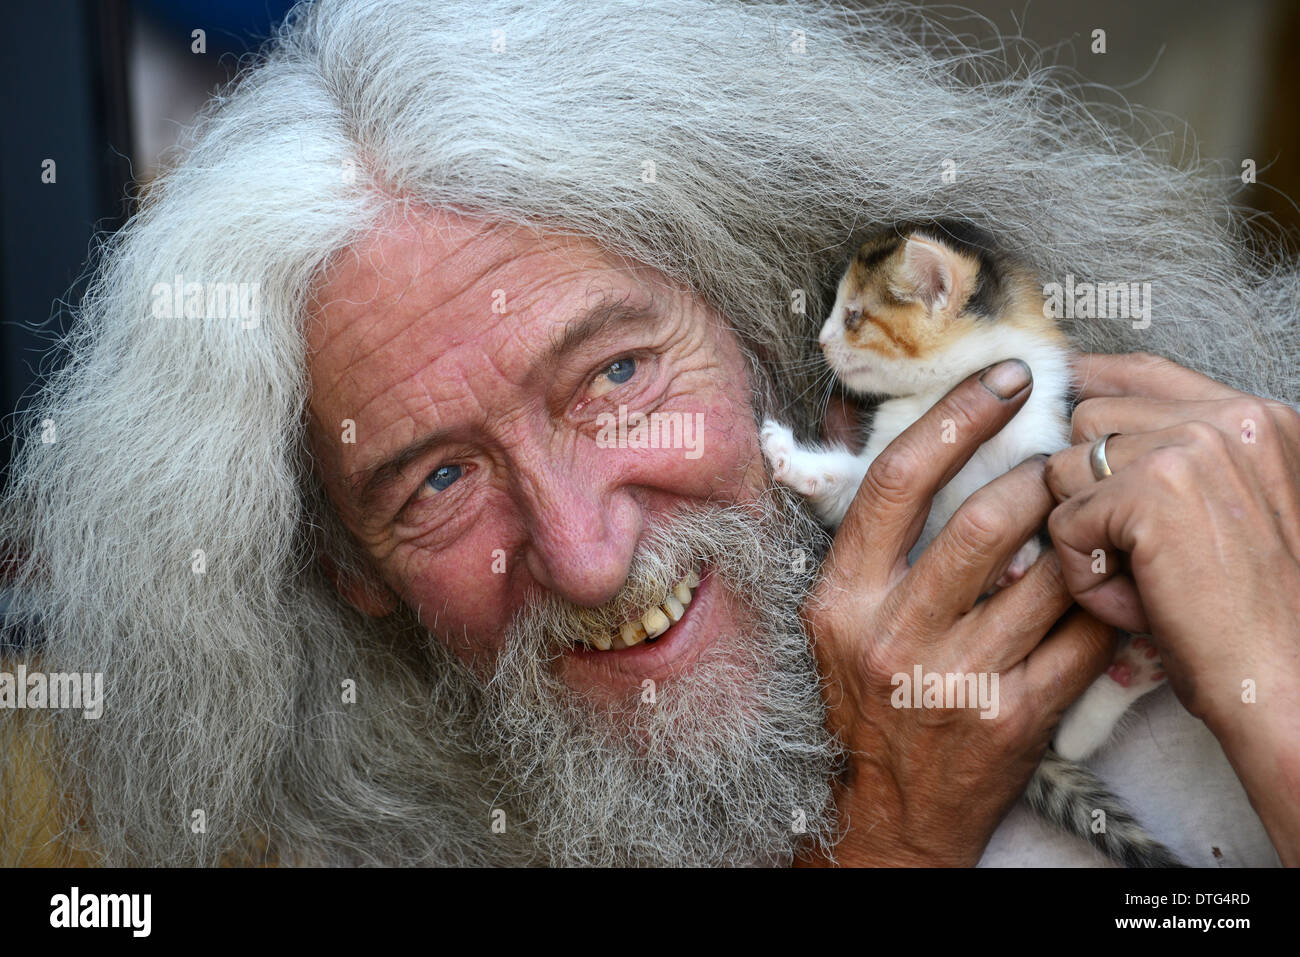 Man with long hair and beard John Julian with one of the kittens he found in his shed. kind animal lovers kitten rescue rescued Britain Uk people male Stock Photo